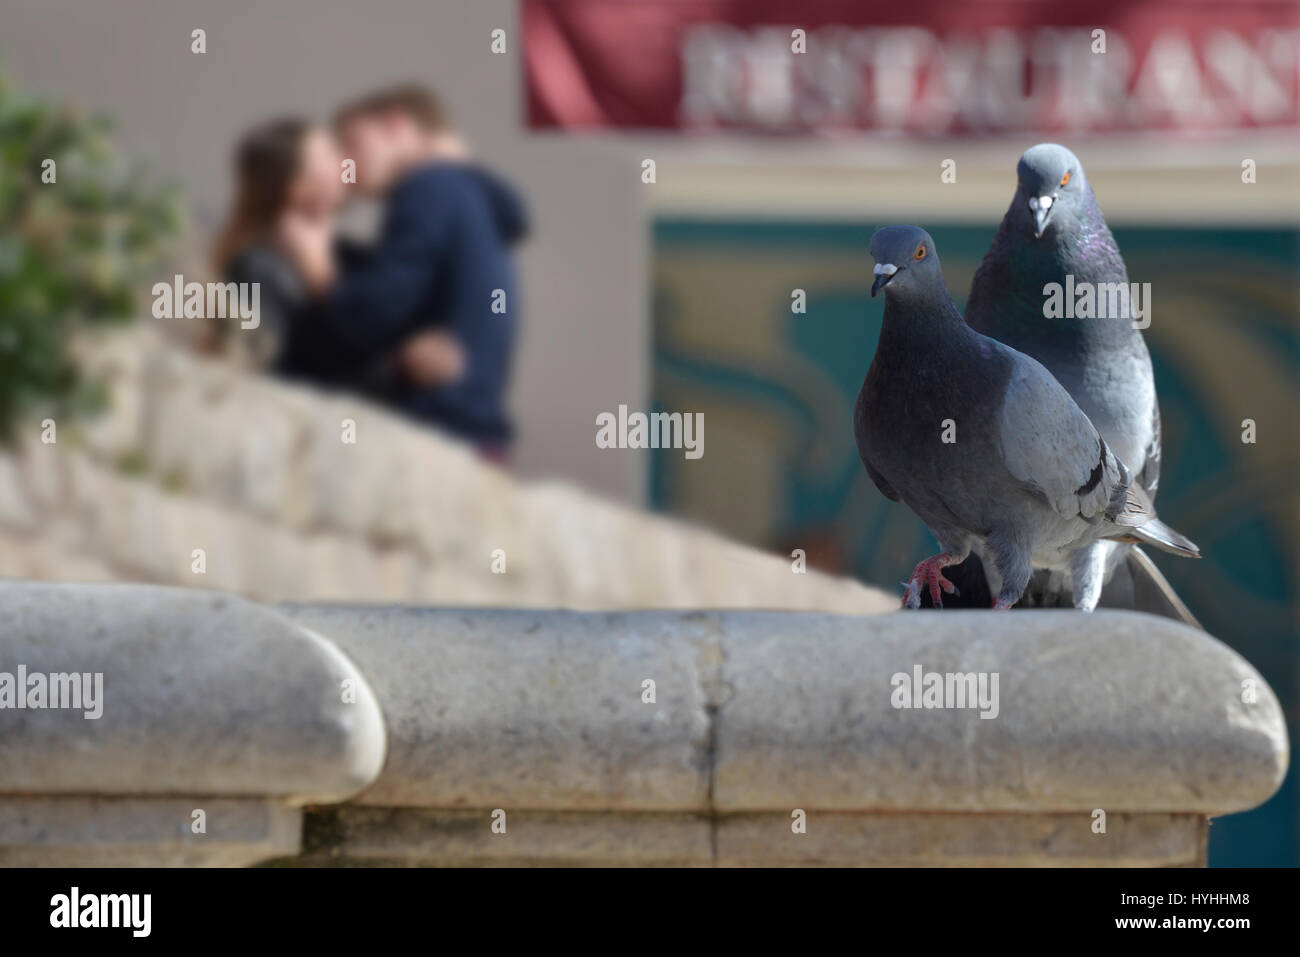 Juxtaposition of a kissing couple in the background, countered by mating pigeons in the foreground. Stock Photo